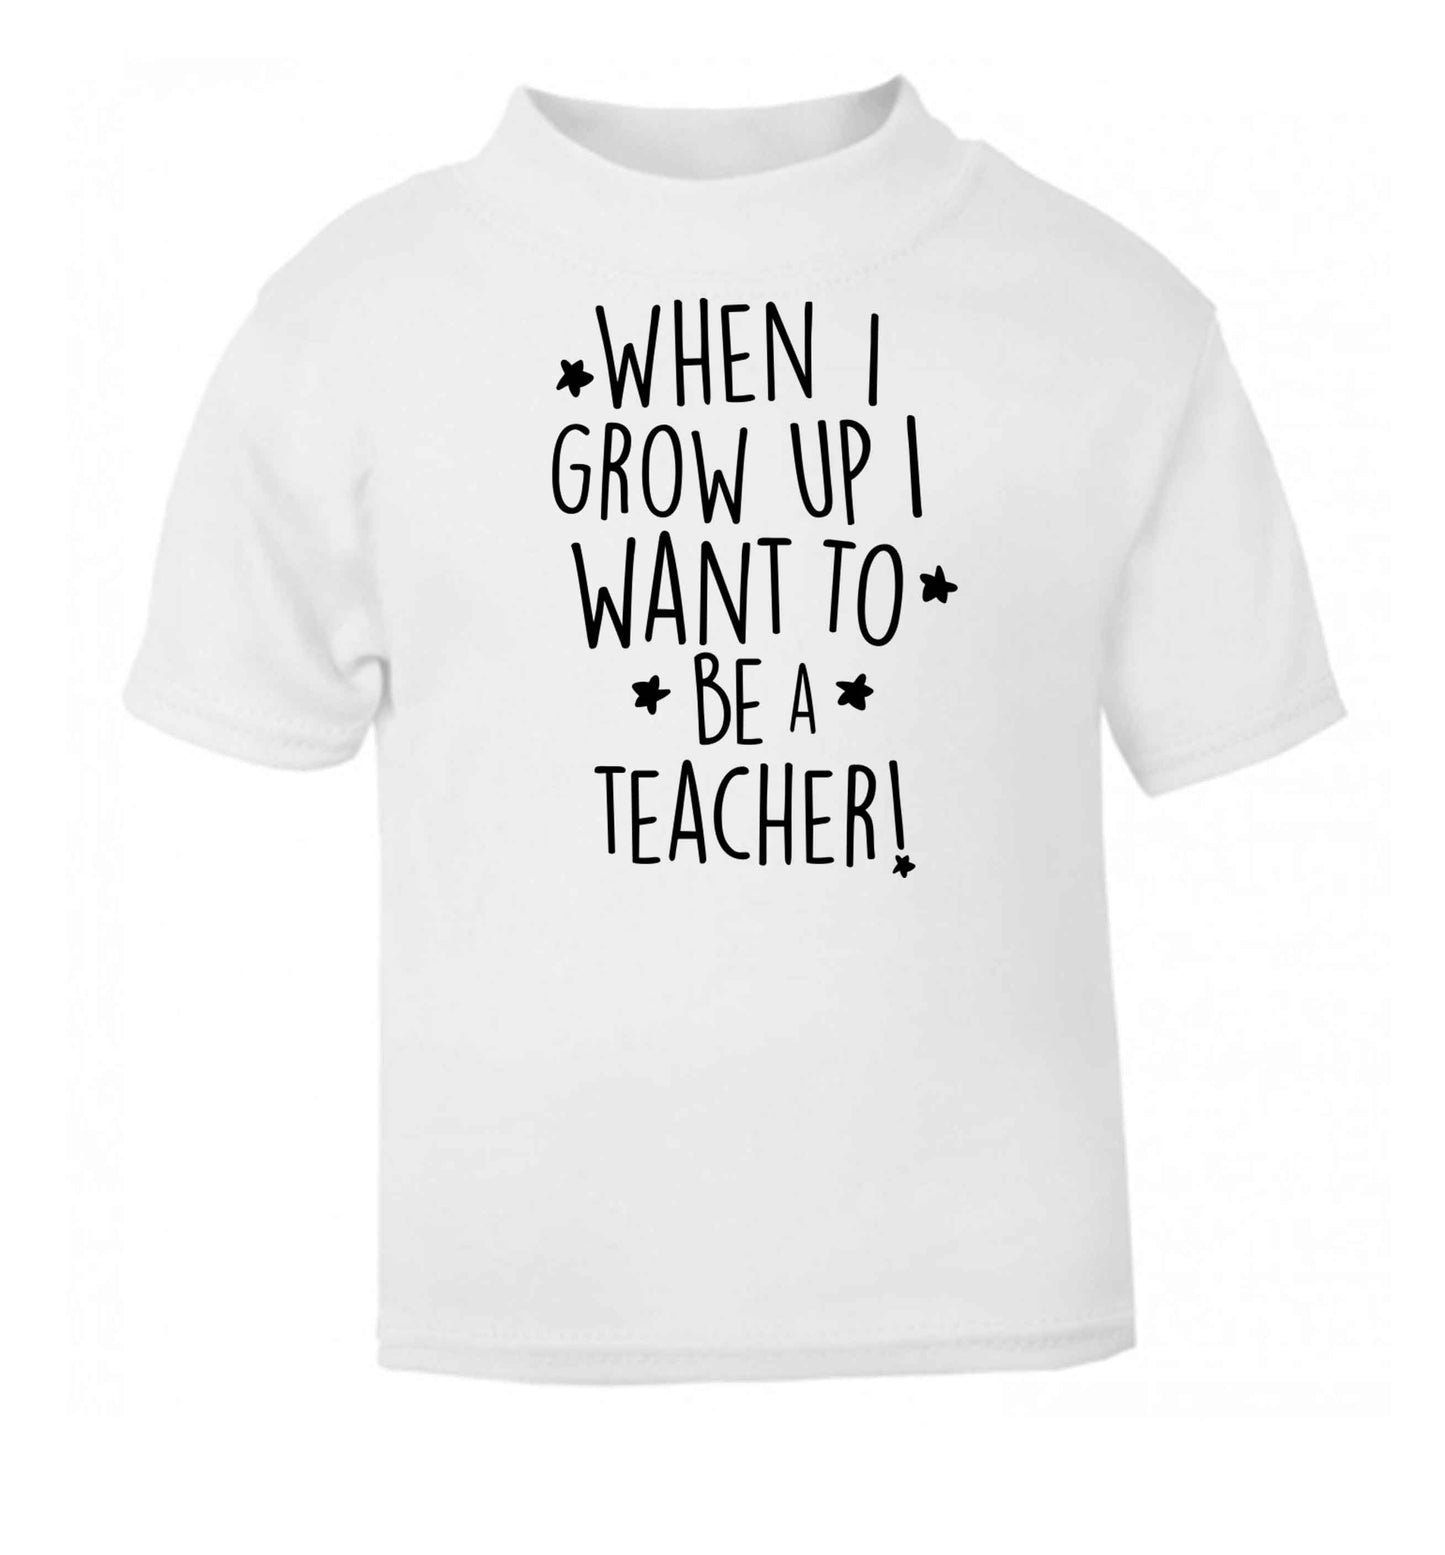 When I grow up I want to be a teacher white baby toddler Tshirt 2 Years